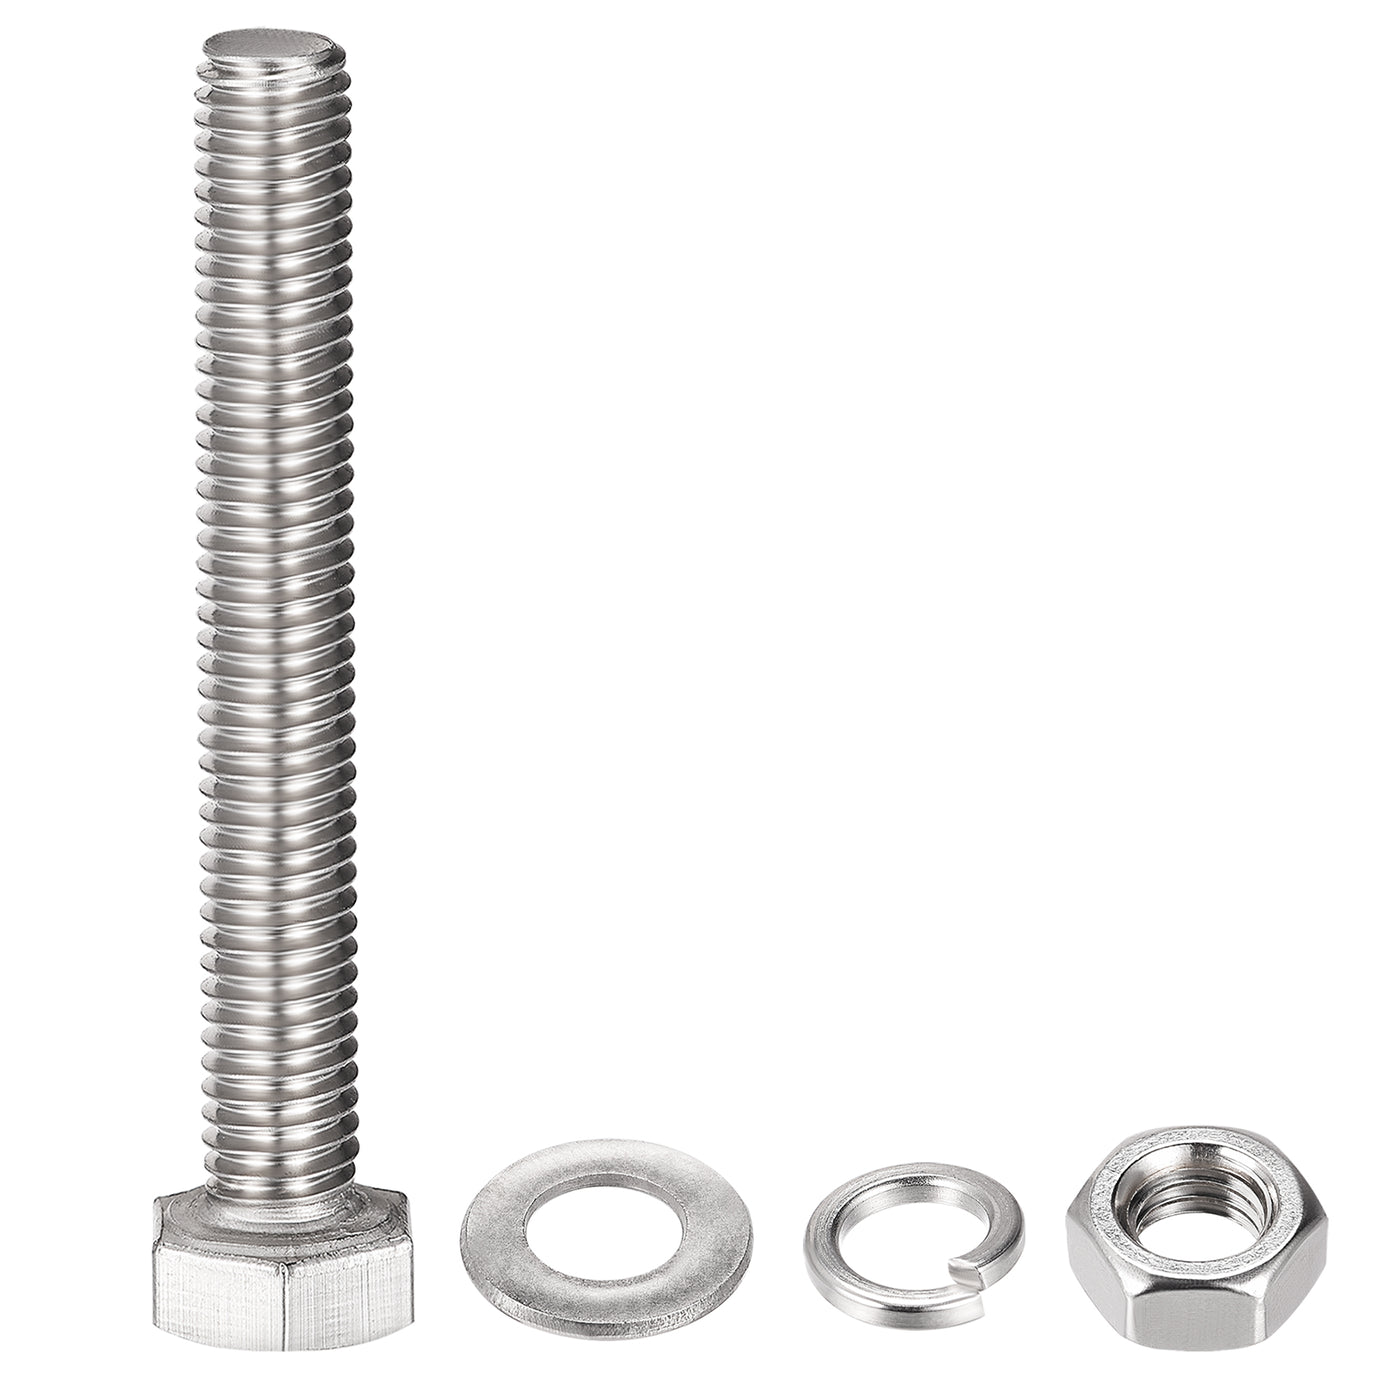 Uxcell Uxcell M8 x 90mm Hex Head Screws Bolts, Nuts, Flat & Lock Washers Kits, 304 Stainless Steel Fully Thread Hexagon Bolts 6 Sets